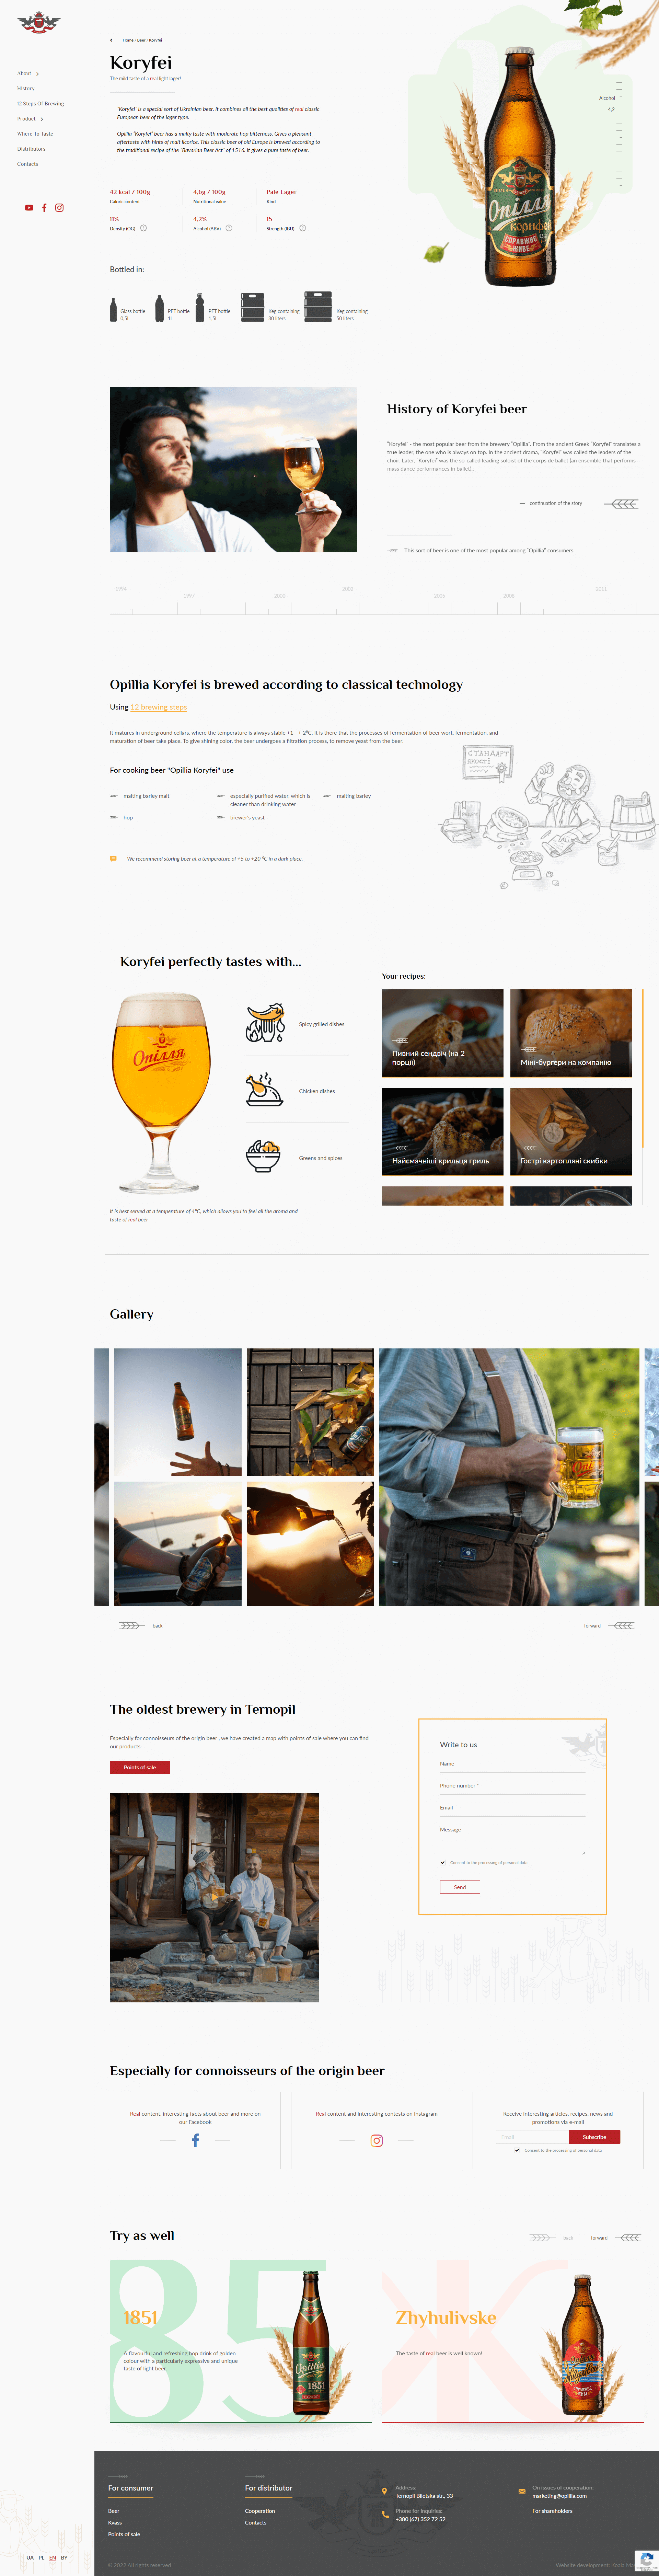 Appetizing product pages